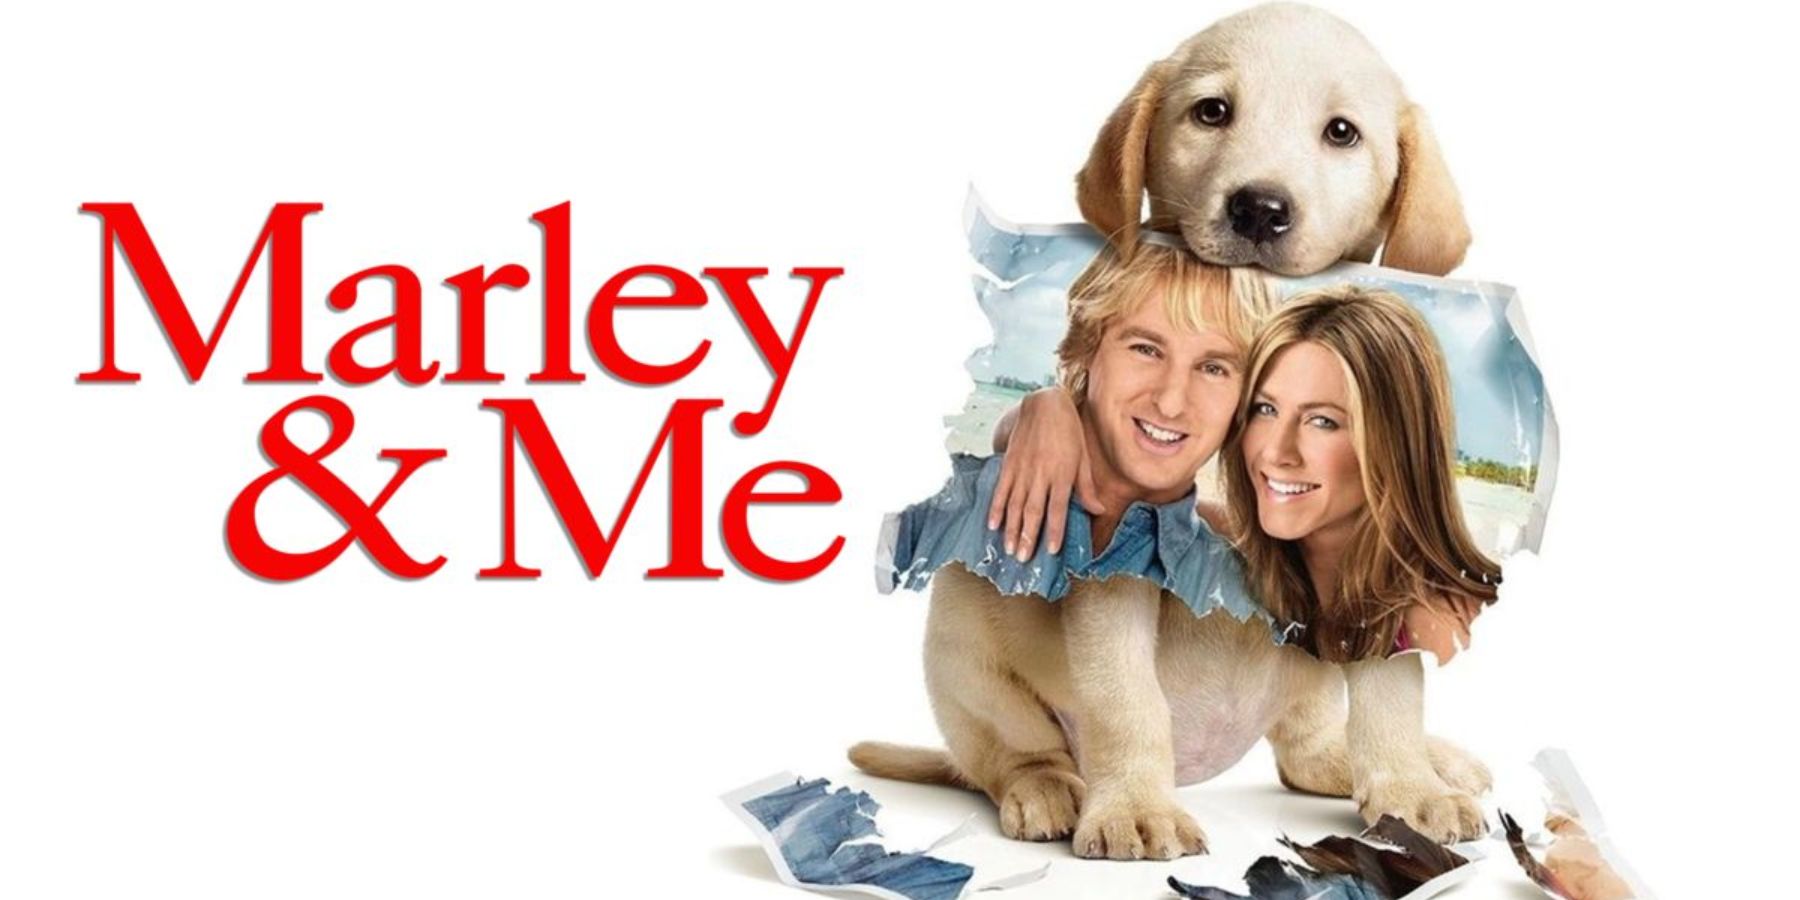 Owen Wilson, Jennifer Aniston, and Marley the dog in Marley and Me